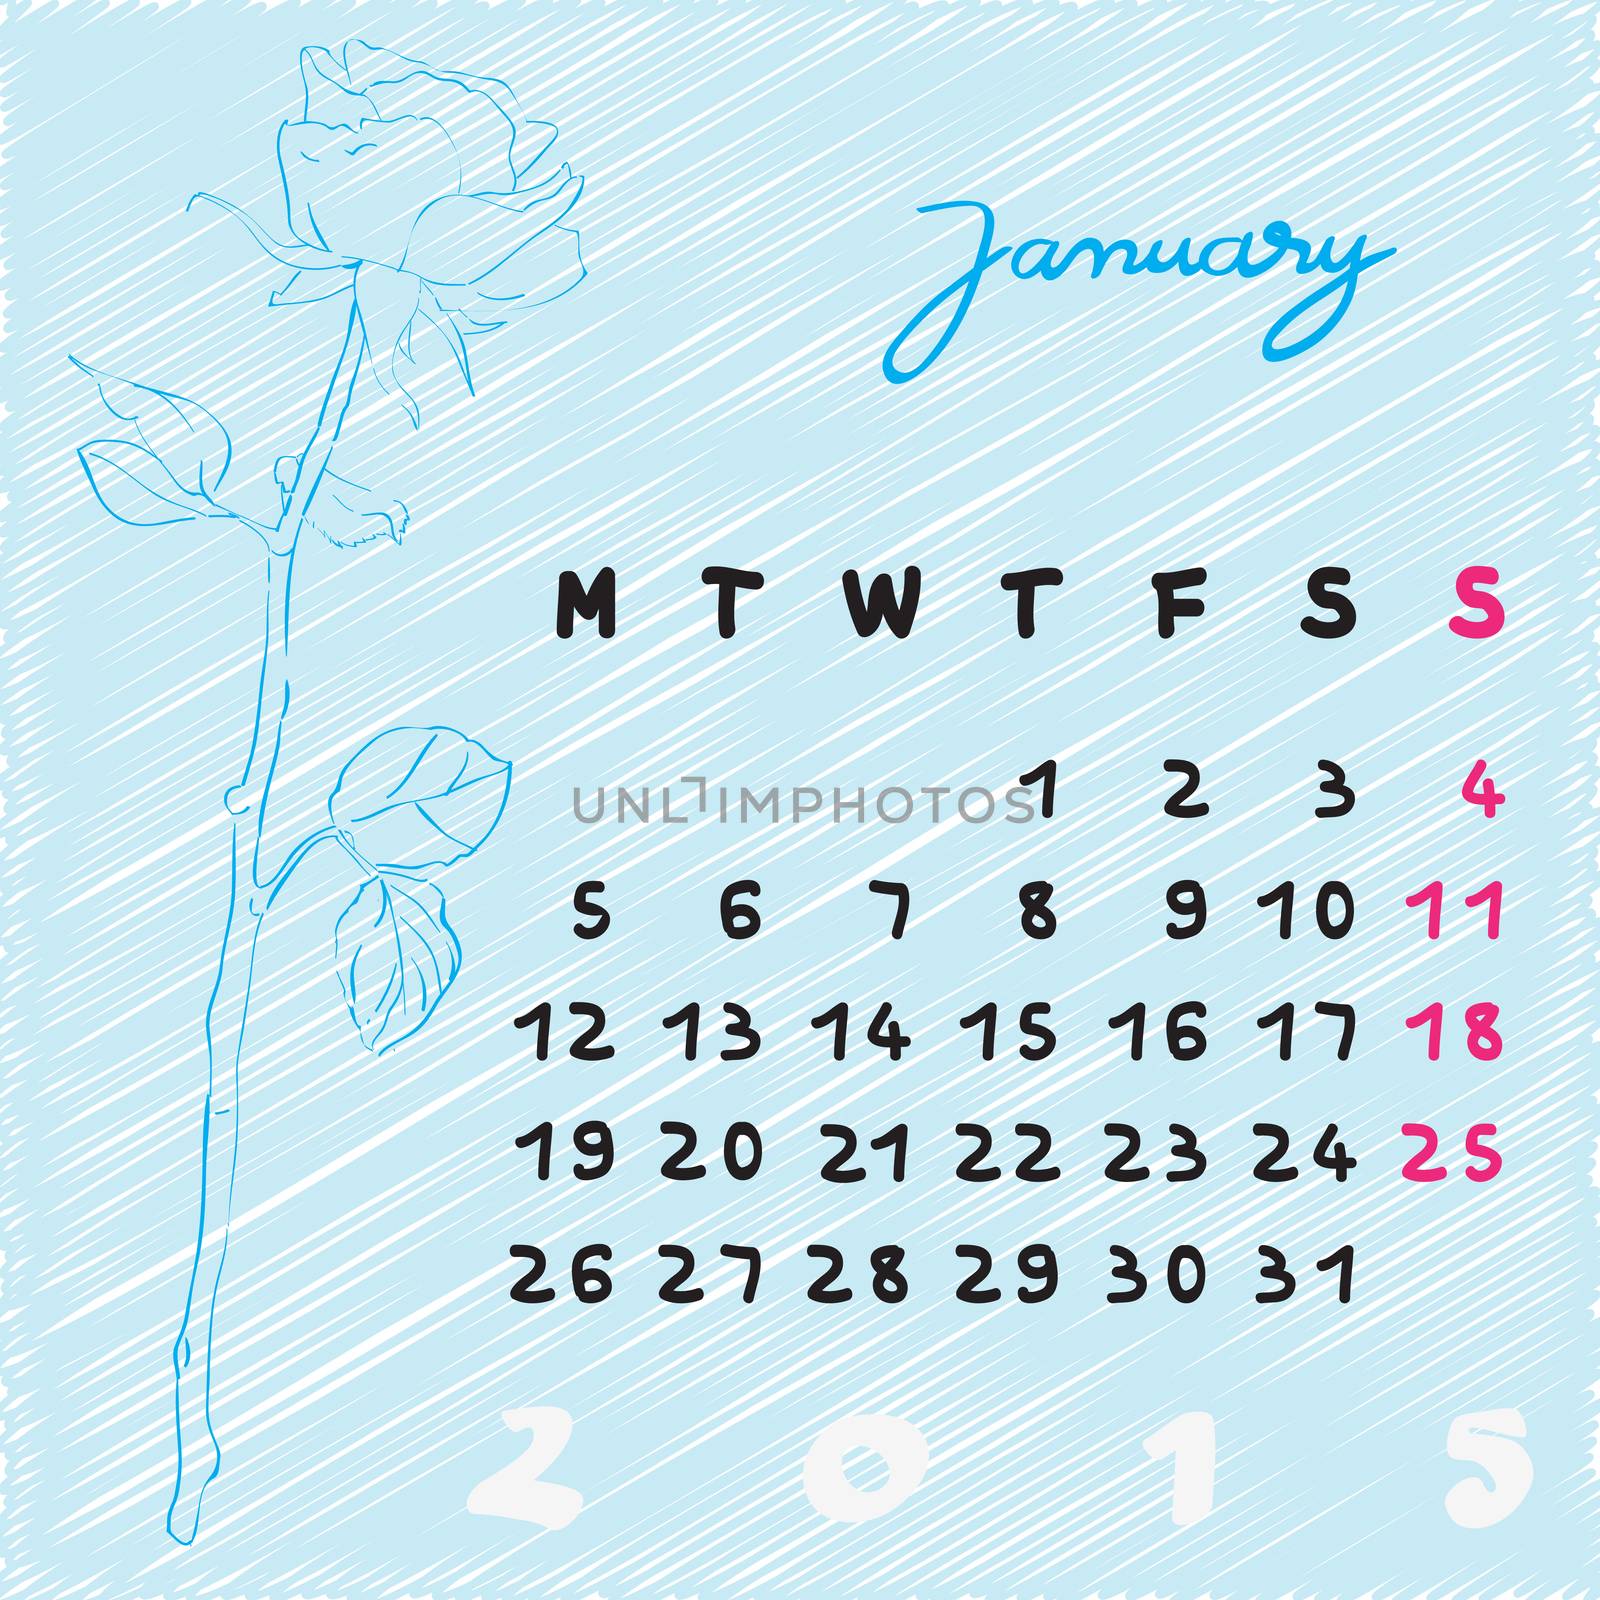 Calendar 2015, graphic illustration of January month calendar with original hand drawn text and rose flower sketch